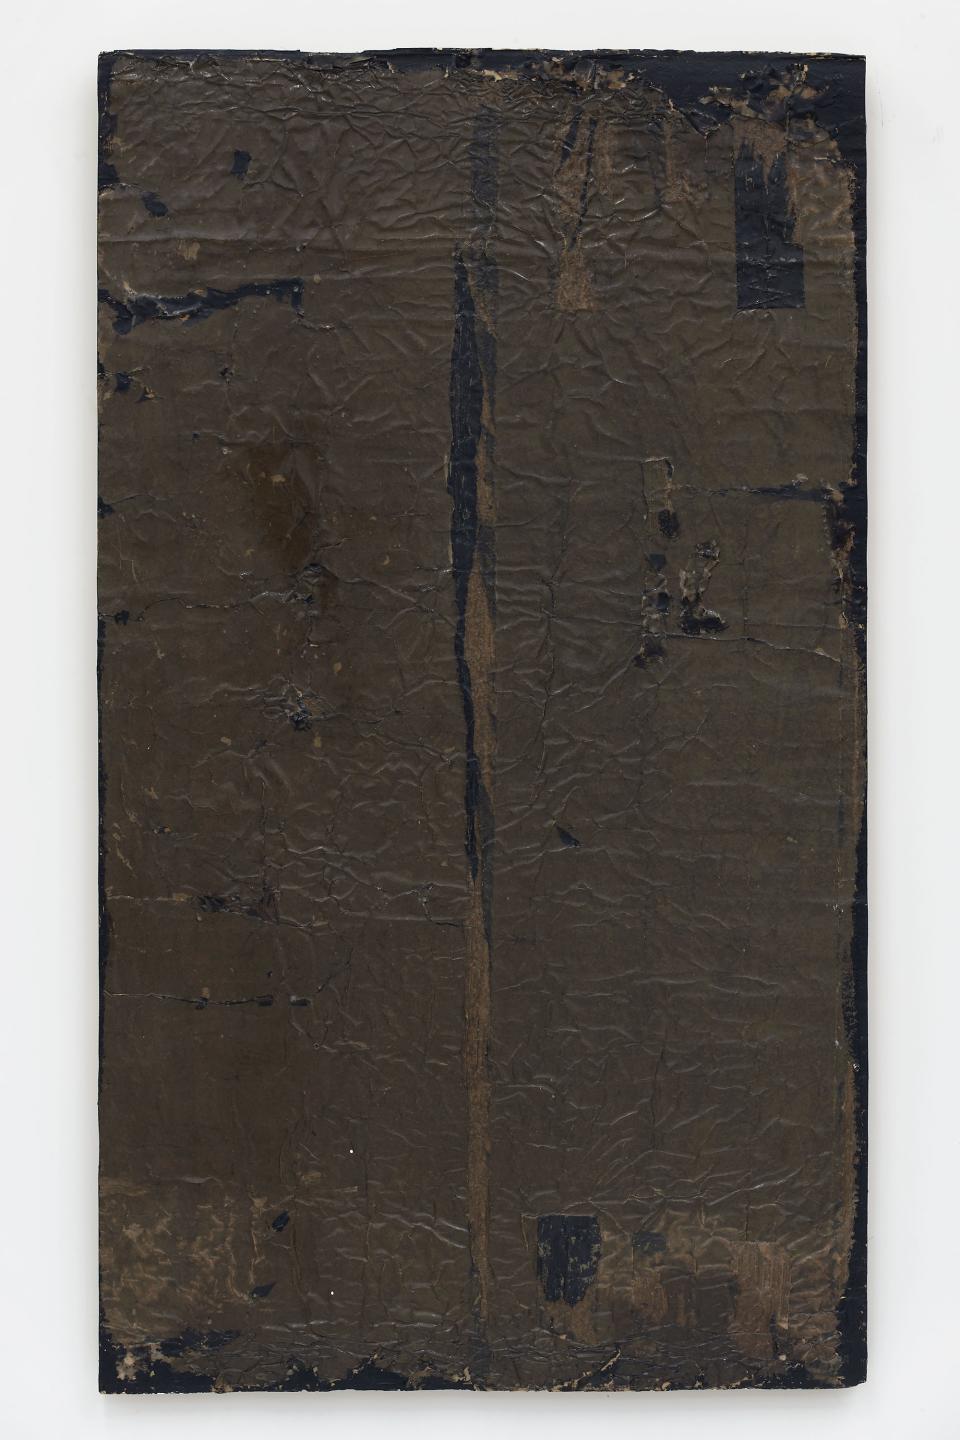 network #0, 2017
Paper, tar, and resin on canvas
58 1/2 x 33 1/4 x 1 1/4 inches